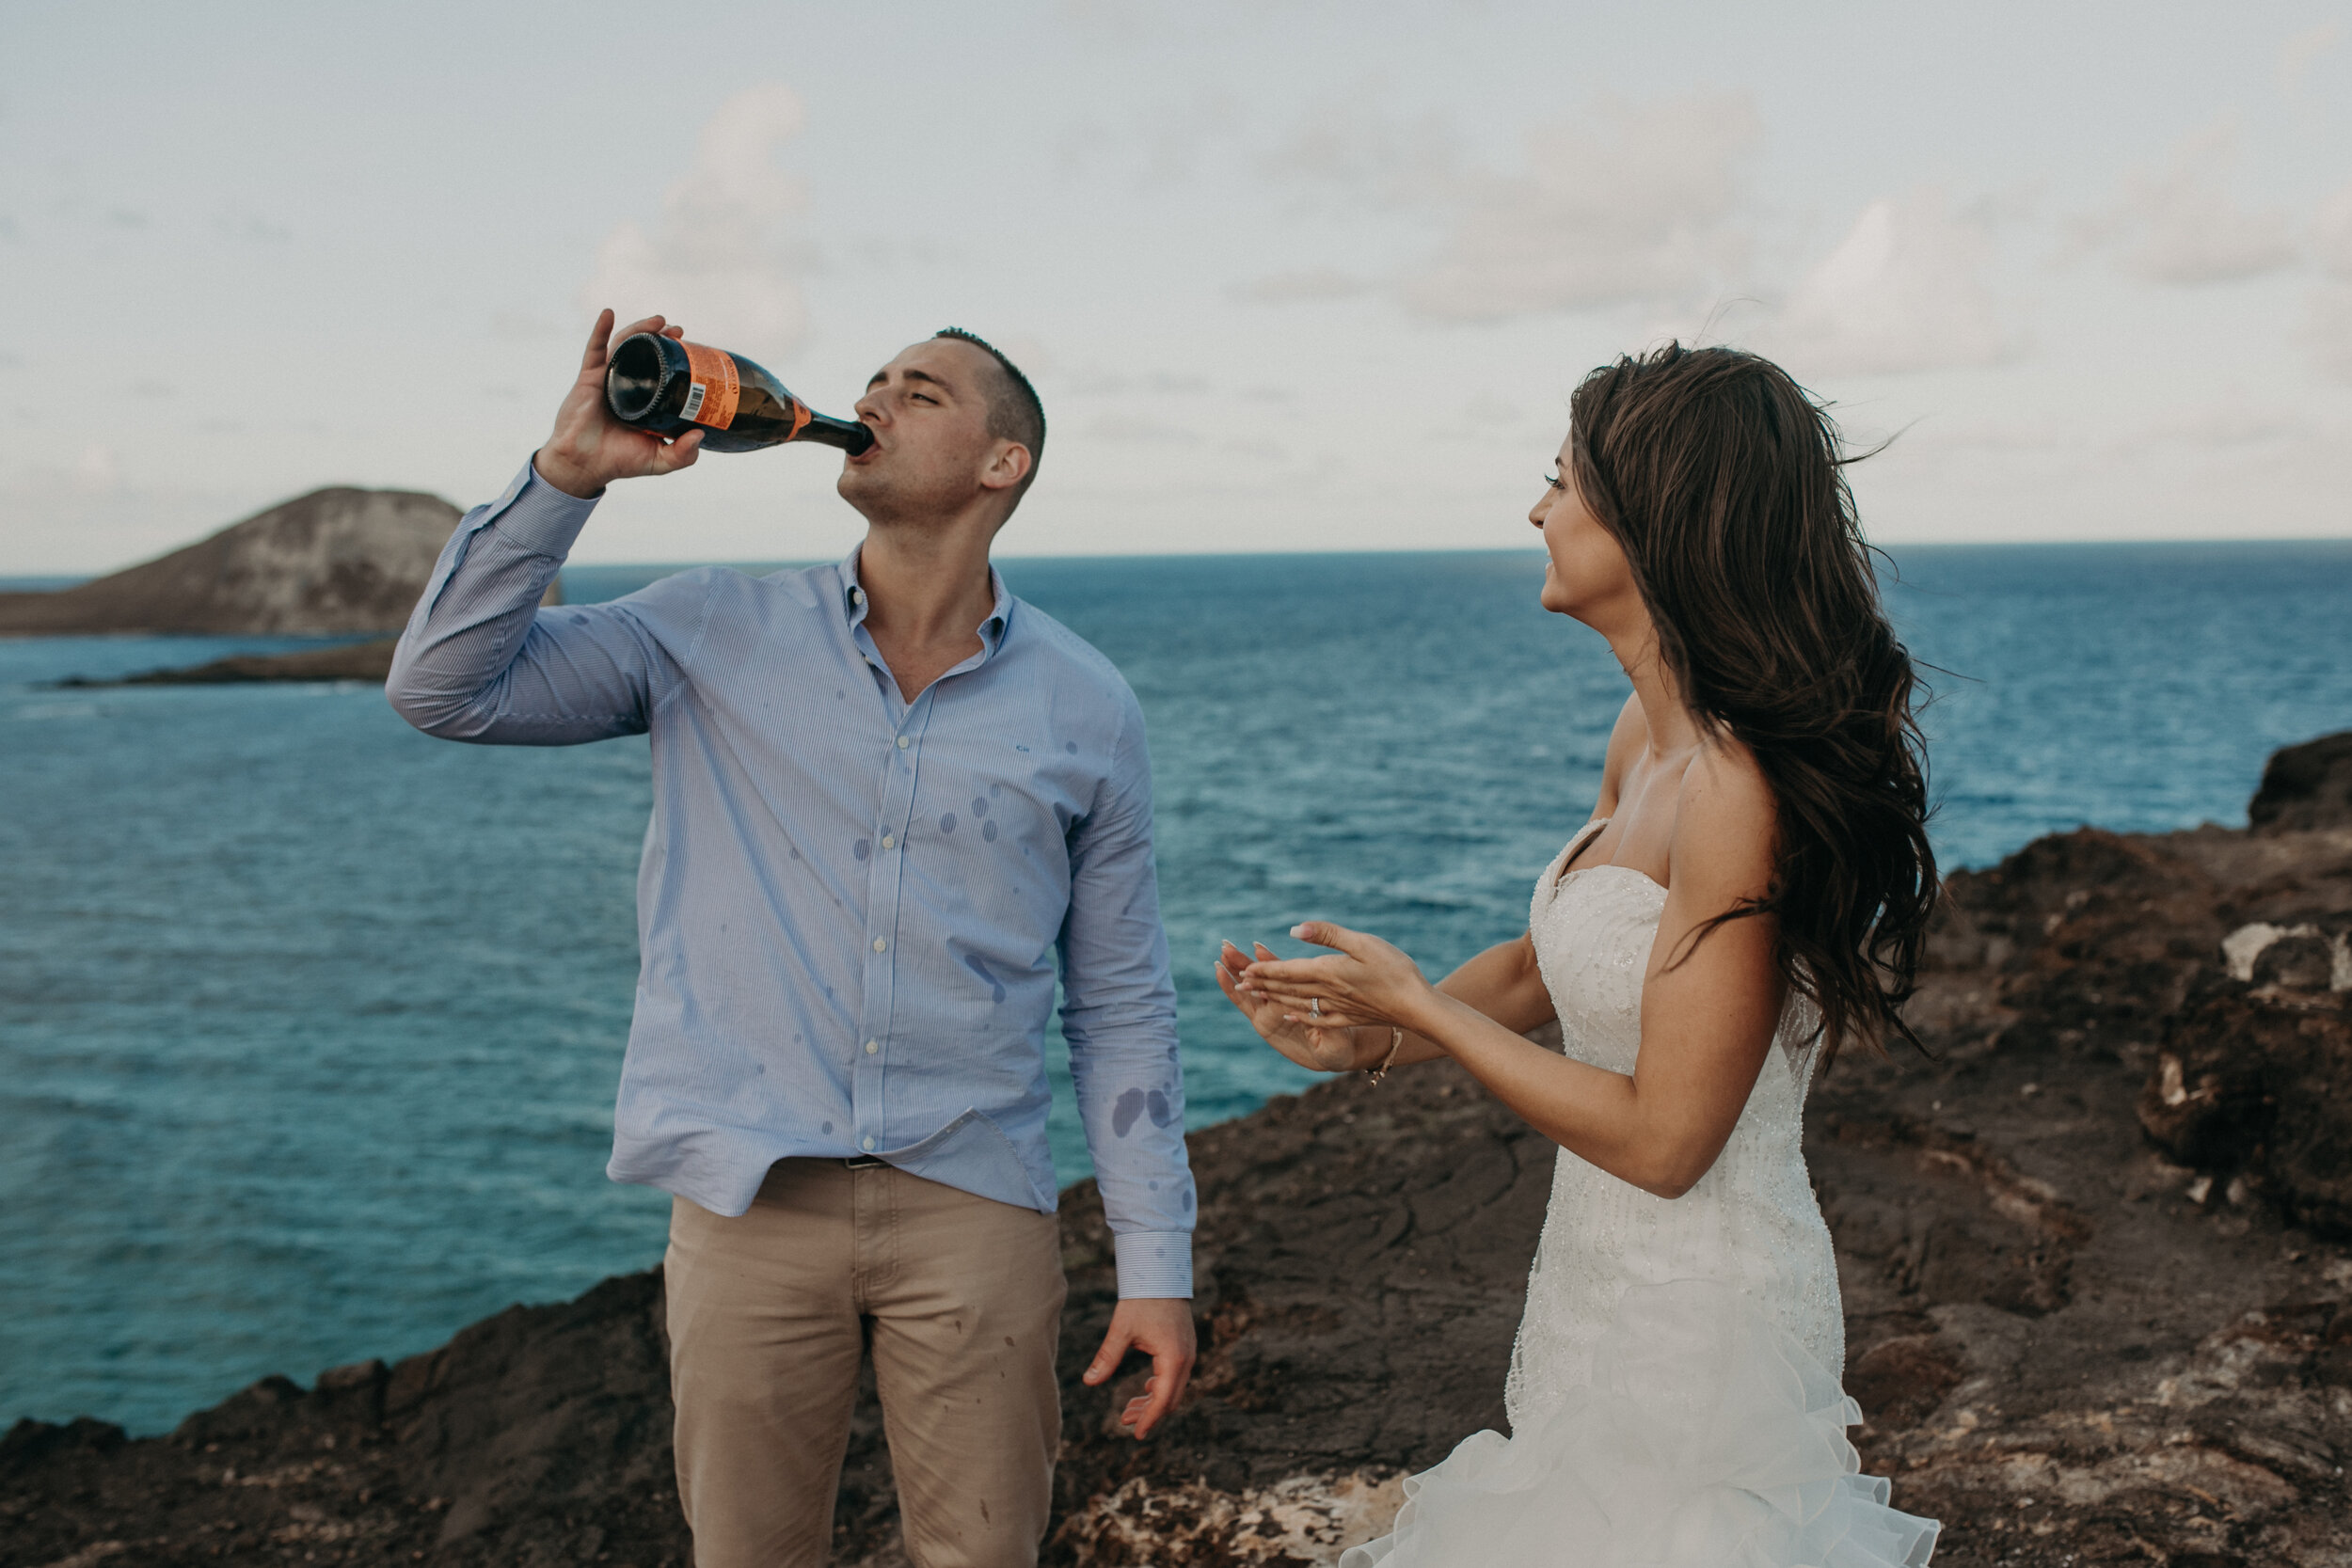  Biggest Reasons Why You Should Just Elope Instead with Andrea Wagner Photography #elopetohawaii #hawaiielopement #oahuelopement #oahuweddingphotographer #weddingdestinations #hawaiiweddingphotographer #hawaiielopementphotographer #makapuulookout #ma